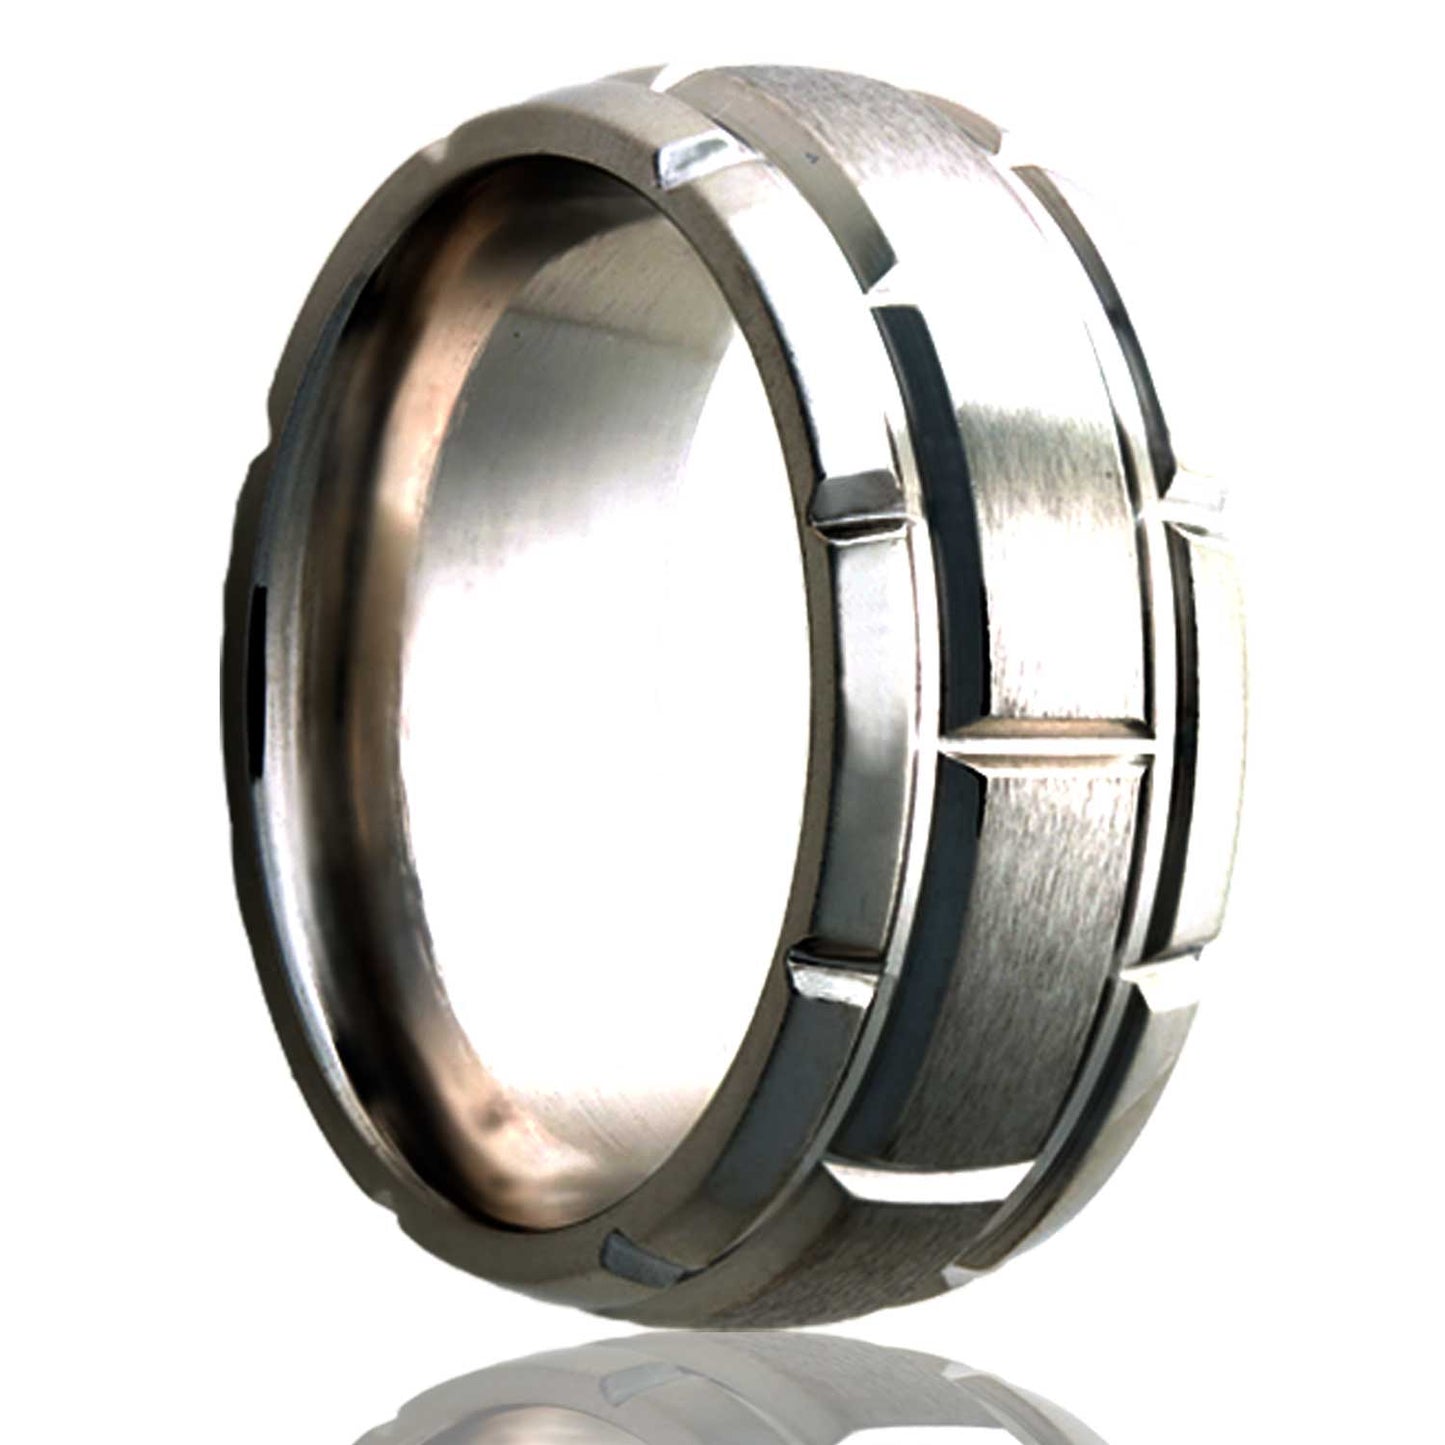 A brick pattern domed satin finish platinum wedding band displayed on a neutral white background.